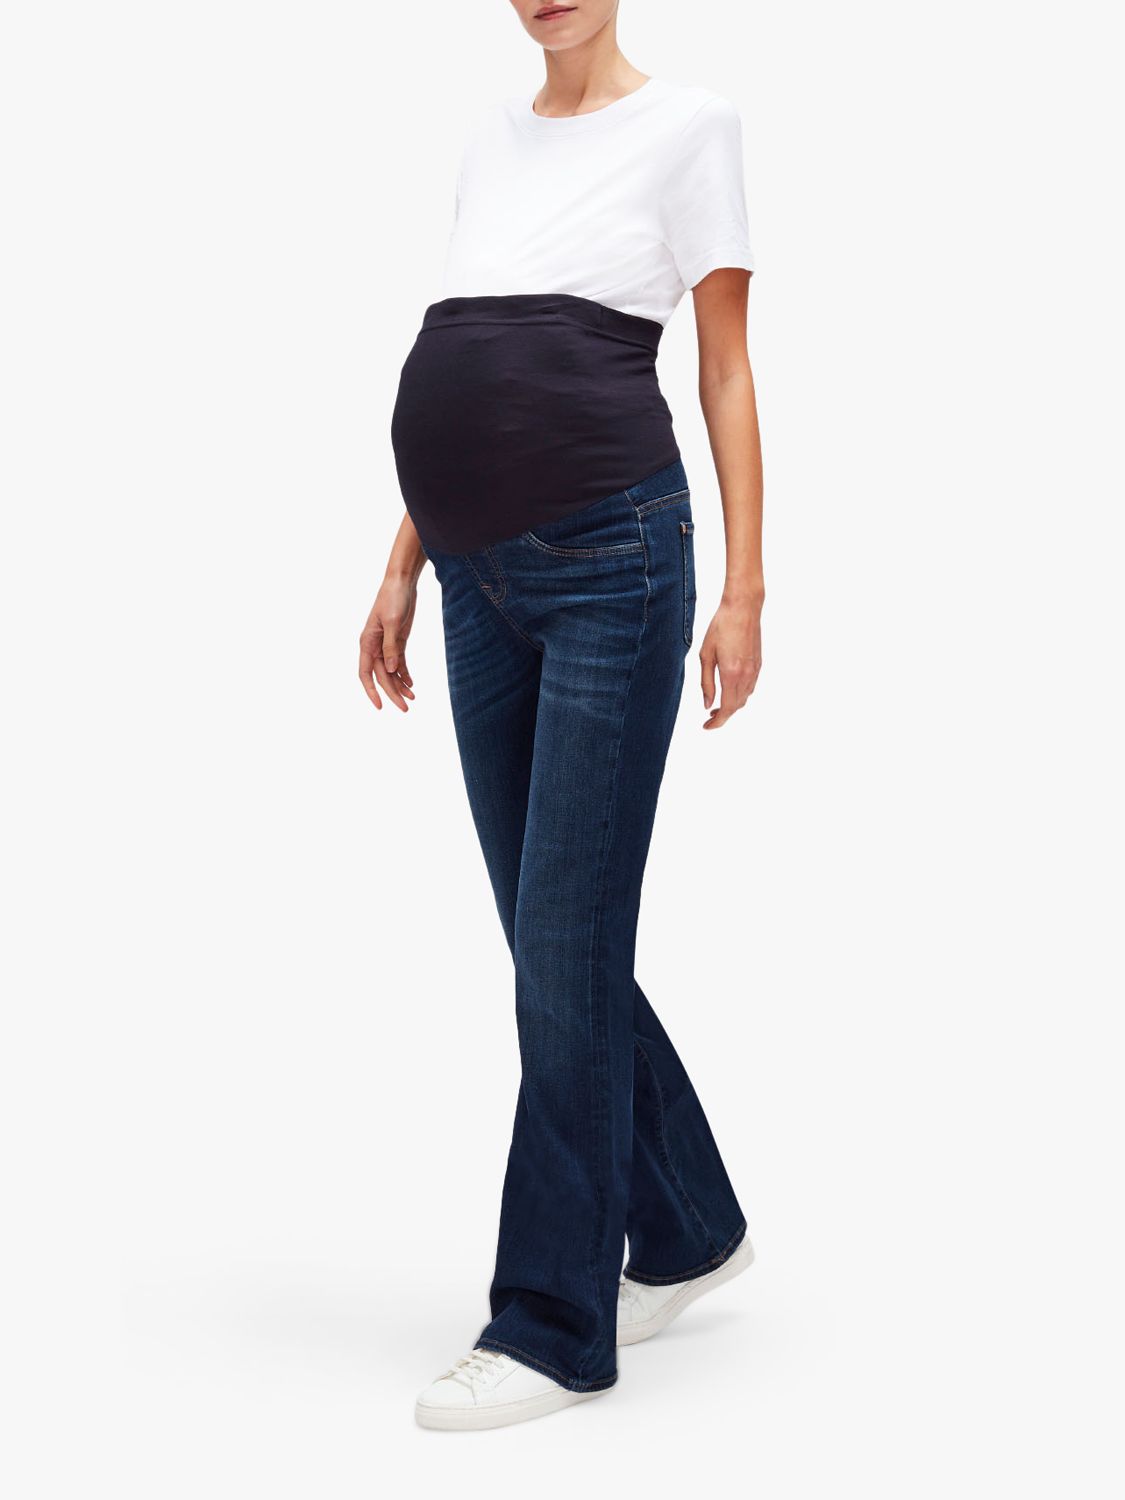 Buy 7 For All Mankind Bootcut Maternity Jeans Online at johnlewis.com